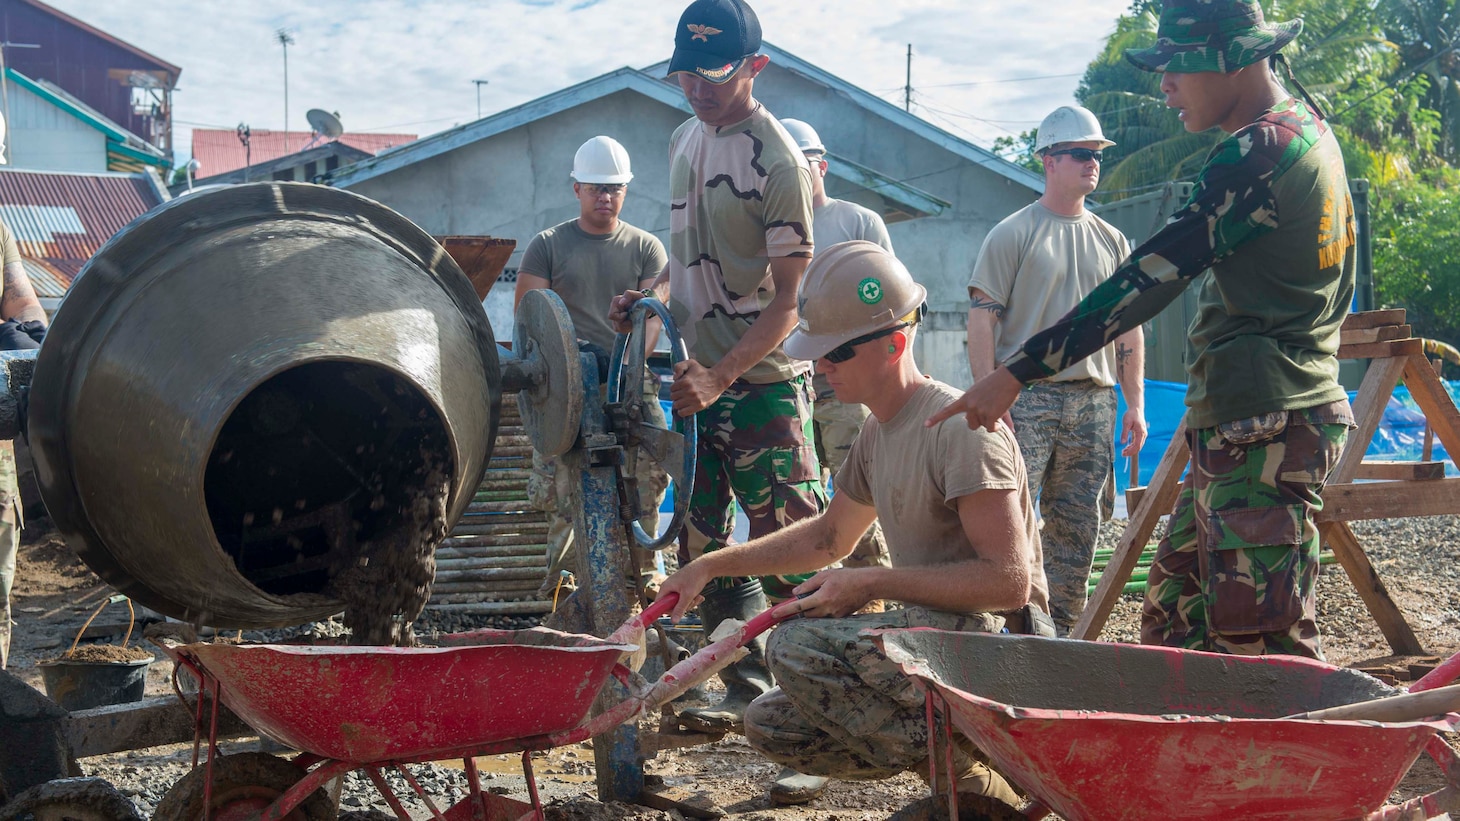 BENGKULU, Indonesia (March 30, 2018) Joint service members pour motor alongside Tentara National Indonesia service members at a community hall construction site during a Pacific Partnership 2018 (PP18).  PP18Õs mission is to work collectively with host and partner nations to enhance regional interoperability and disaster response capabilities, increase stability and security in the region, and foster new and enduring friendships across the Indo-Pacific Region. Pacific Partnership, now in its 13th iteration, is the largest annual multinational humanitarian assistance and disaster relief preparedness mission conducted in the Indo-Pacific. (U.S. Navy photo by Mass Communication Specialist 3rd Class Cameron Pinske/Released)